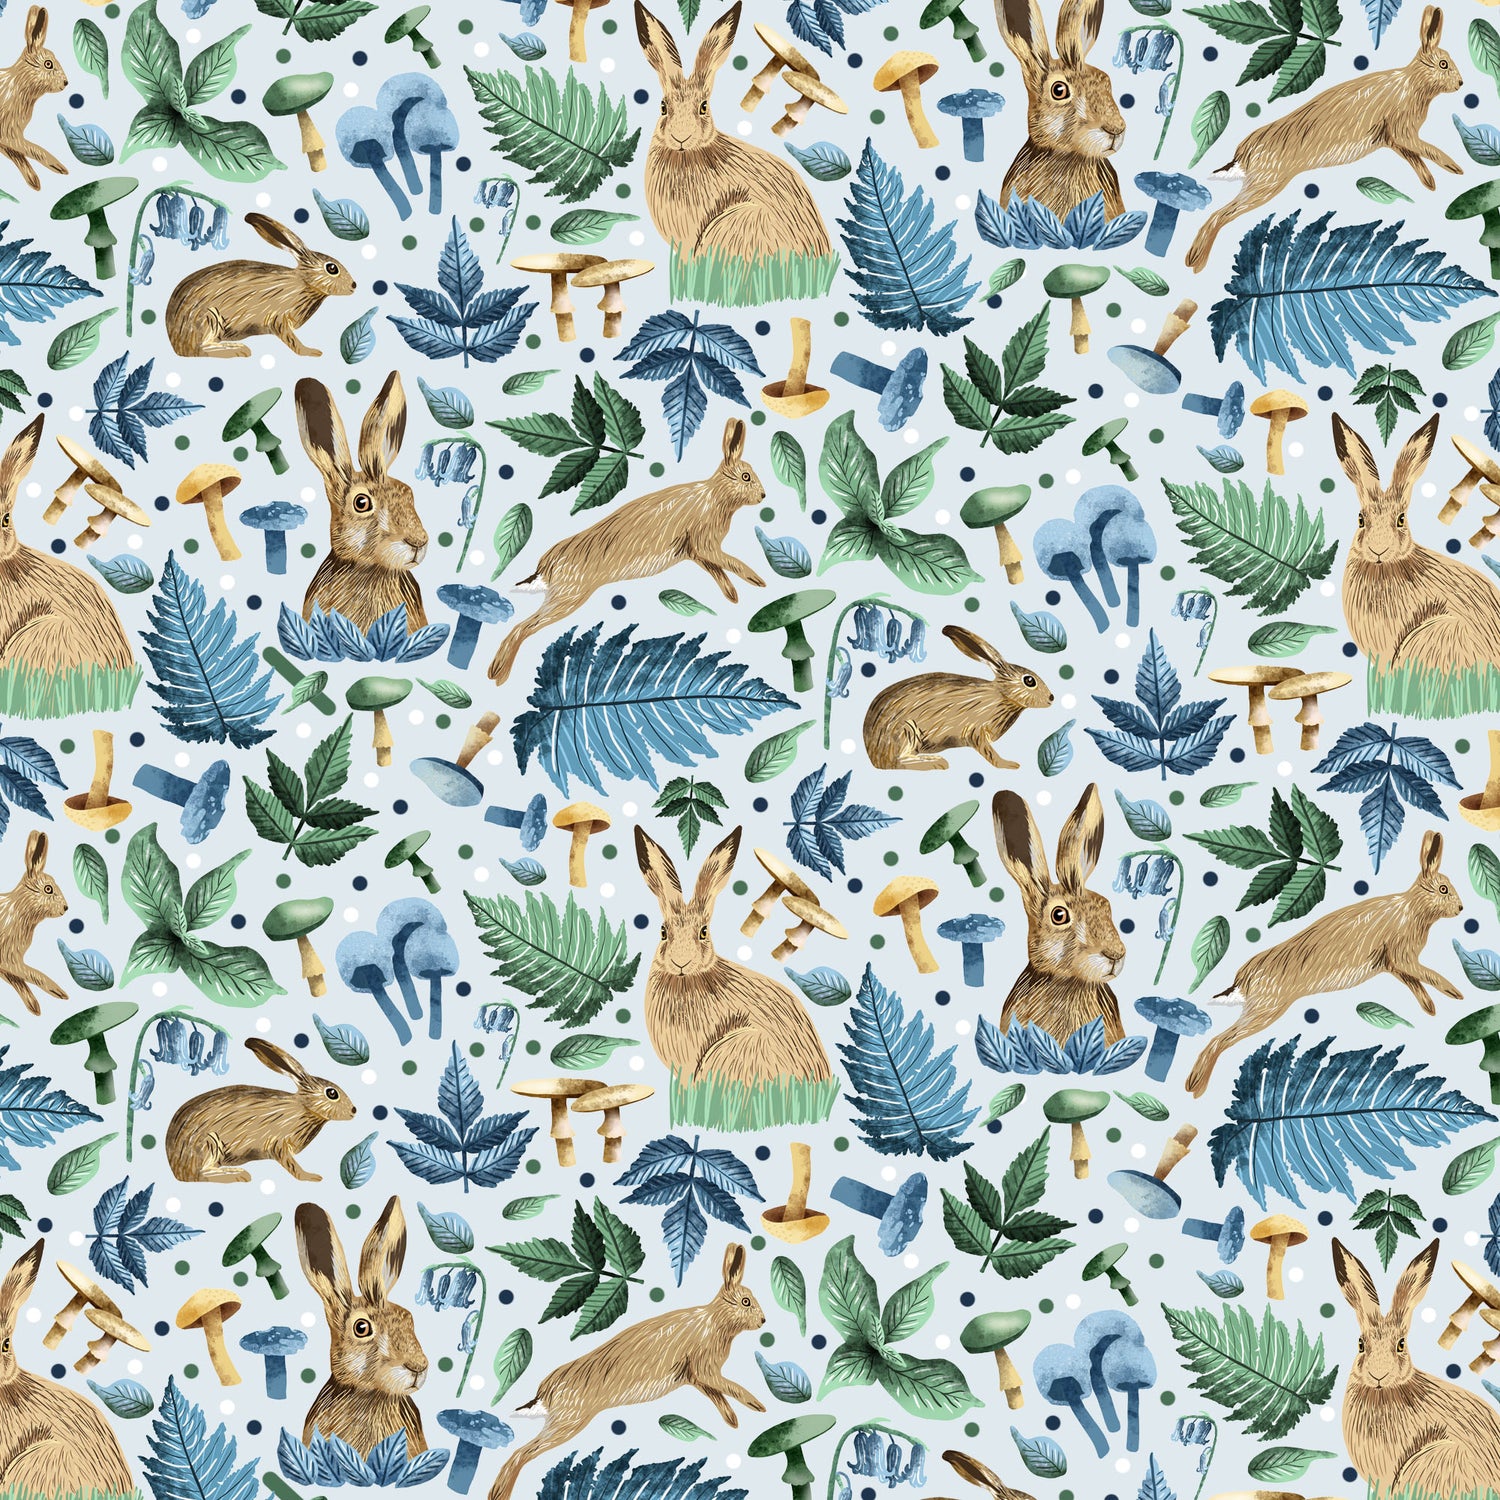 hare surface pattern design